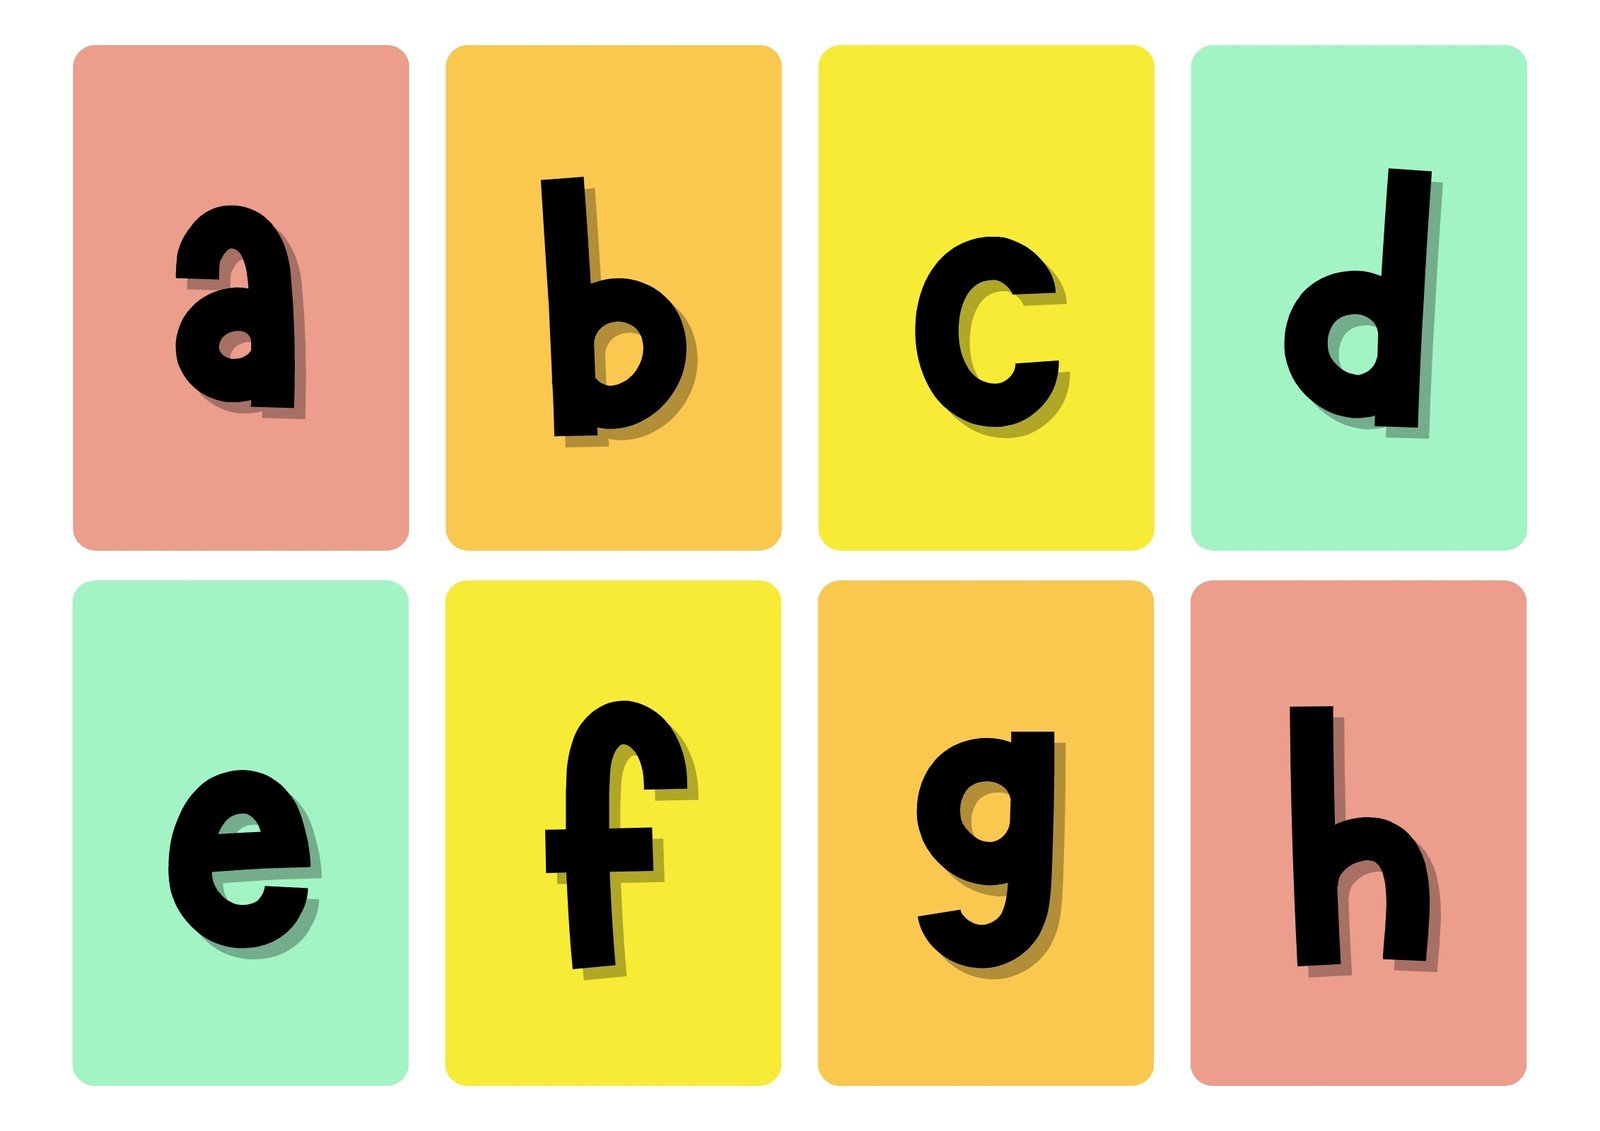 letters of the alphabet templates